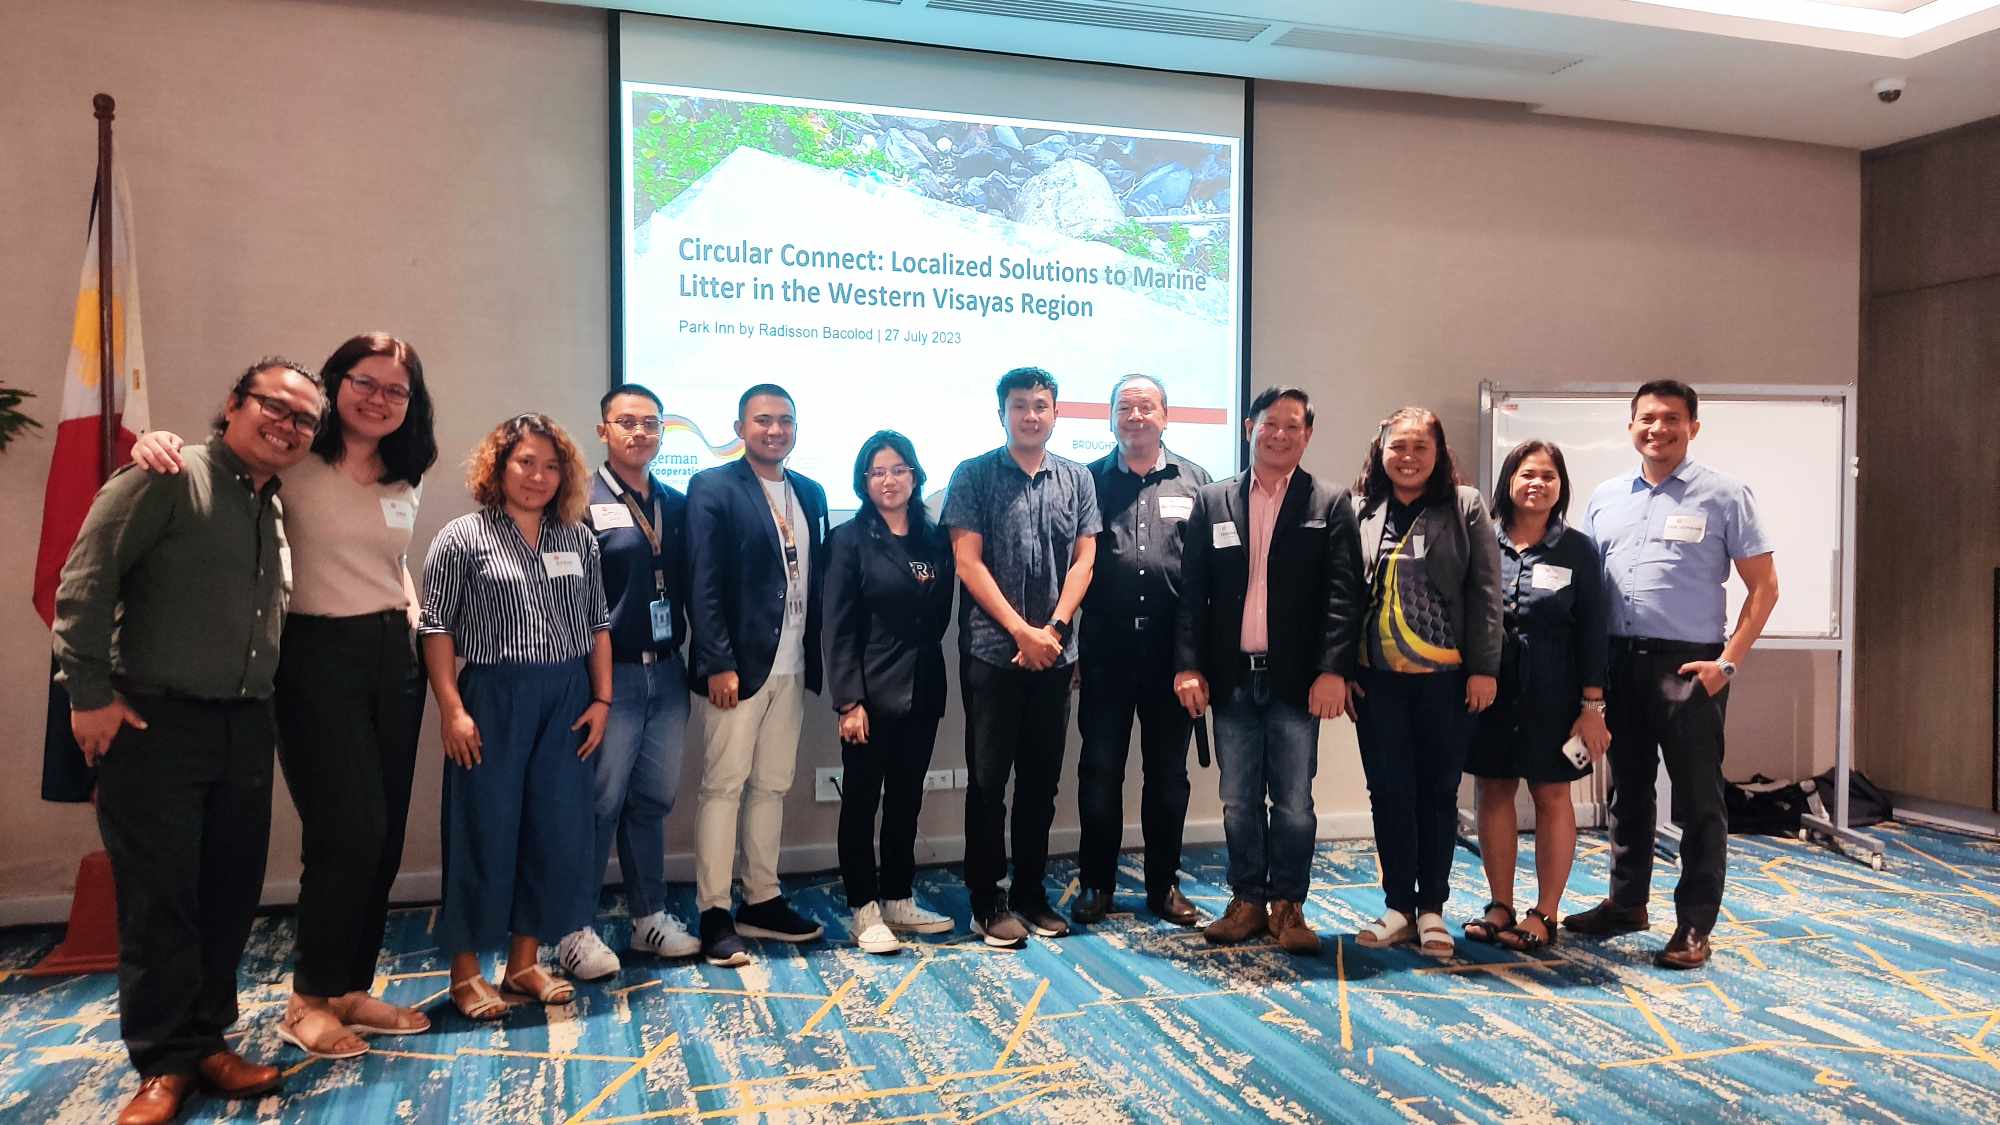 JBLCF- Bacolod joins the Environmental Workshop on Circular Connect: Localized Solutions to Marine Litter in the Western Visayas Region  